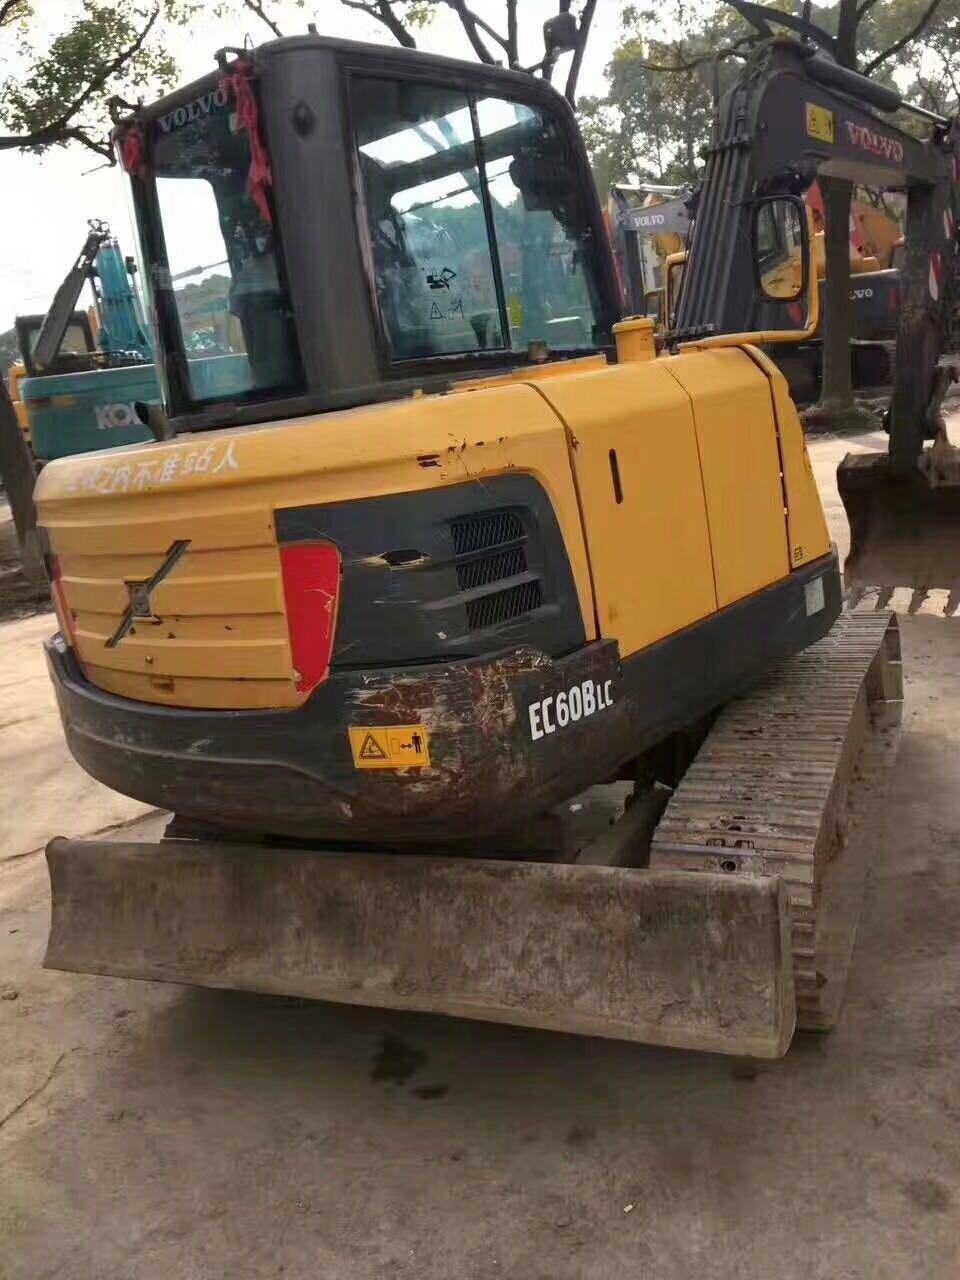 Used Volvo Ec60 Crawler Excavator with Hydraulic Breaker Line and Hammer in Good Condition